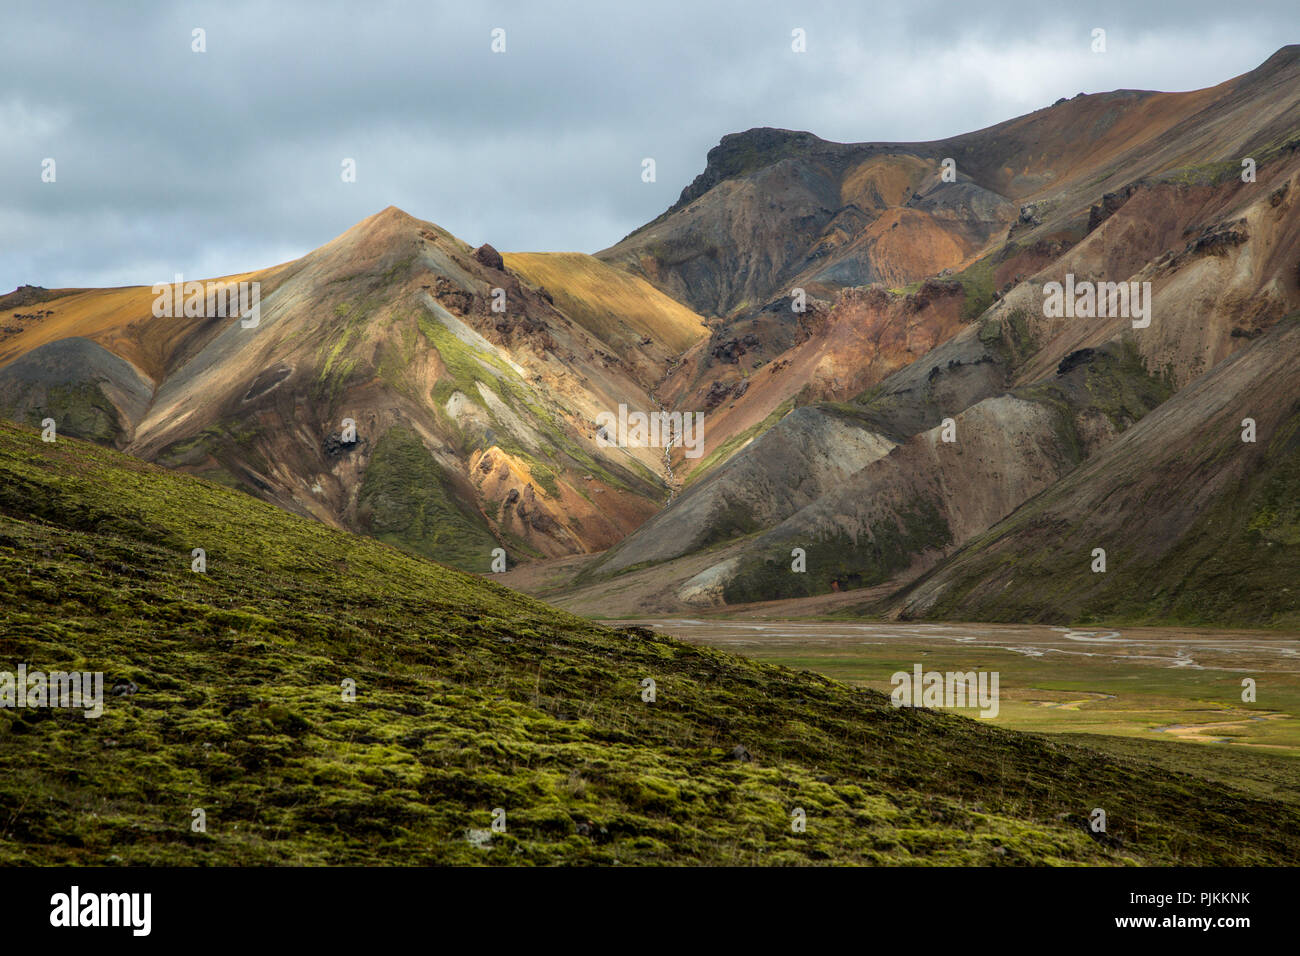 Iceland, Landmannalaugar, rhyolite mountains, green moss in front of colored mountains, light mood Stock Photo